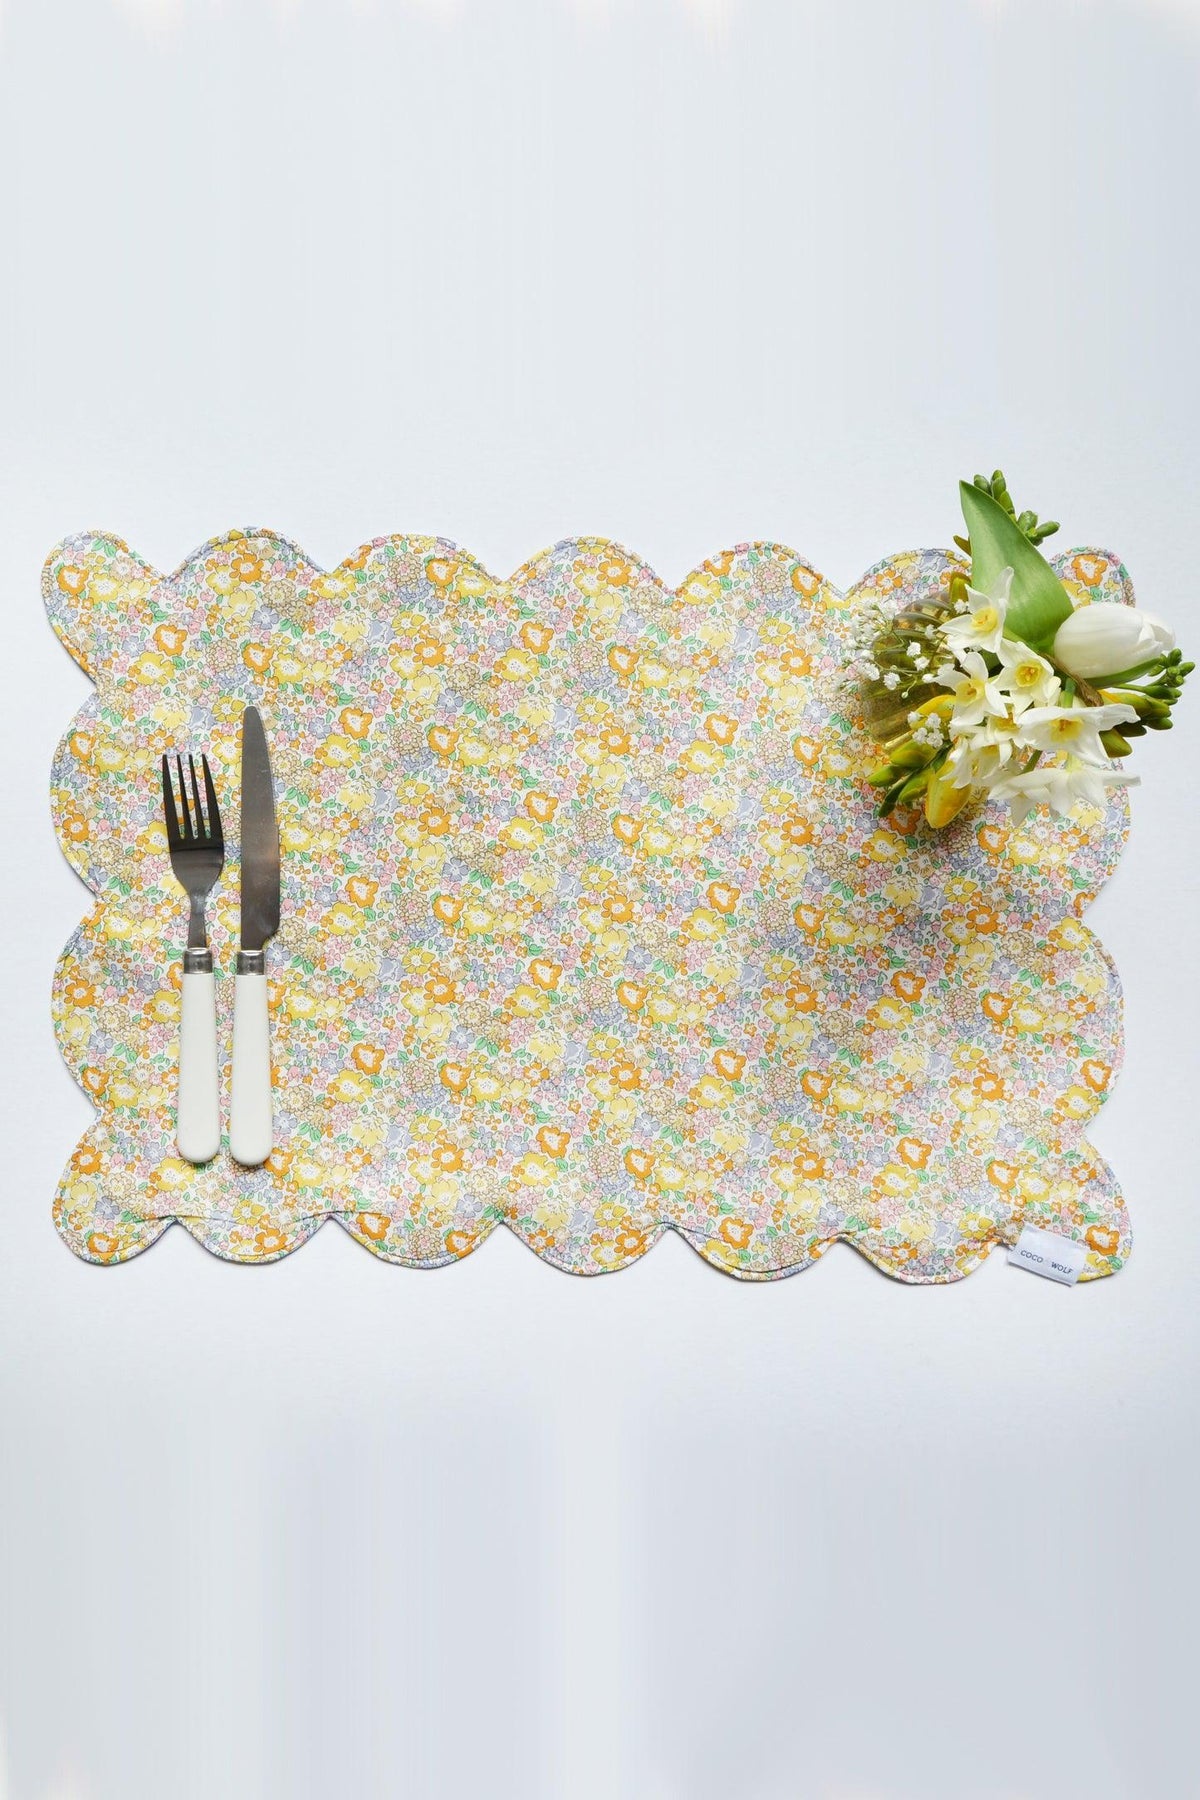 Reversible Scalloped Placemat made with Liberty Fabric MICHELLE & BETSY - Coco & Wolf